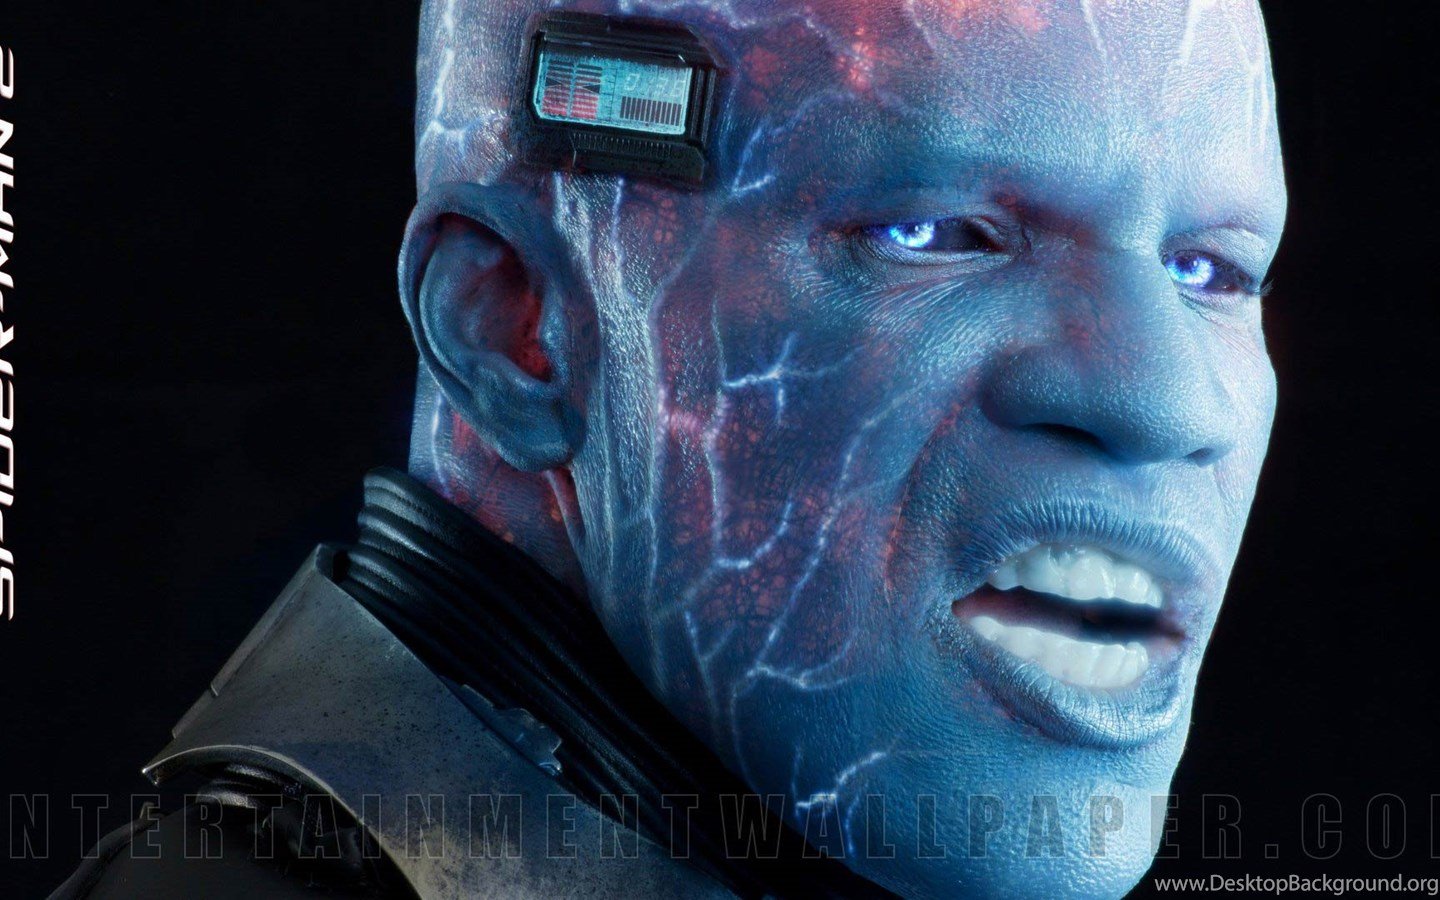 The Amazing Spider Man 2 Electro Closeup Side Sideview Wallpaper. Desktop Background